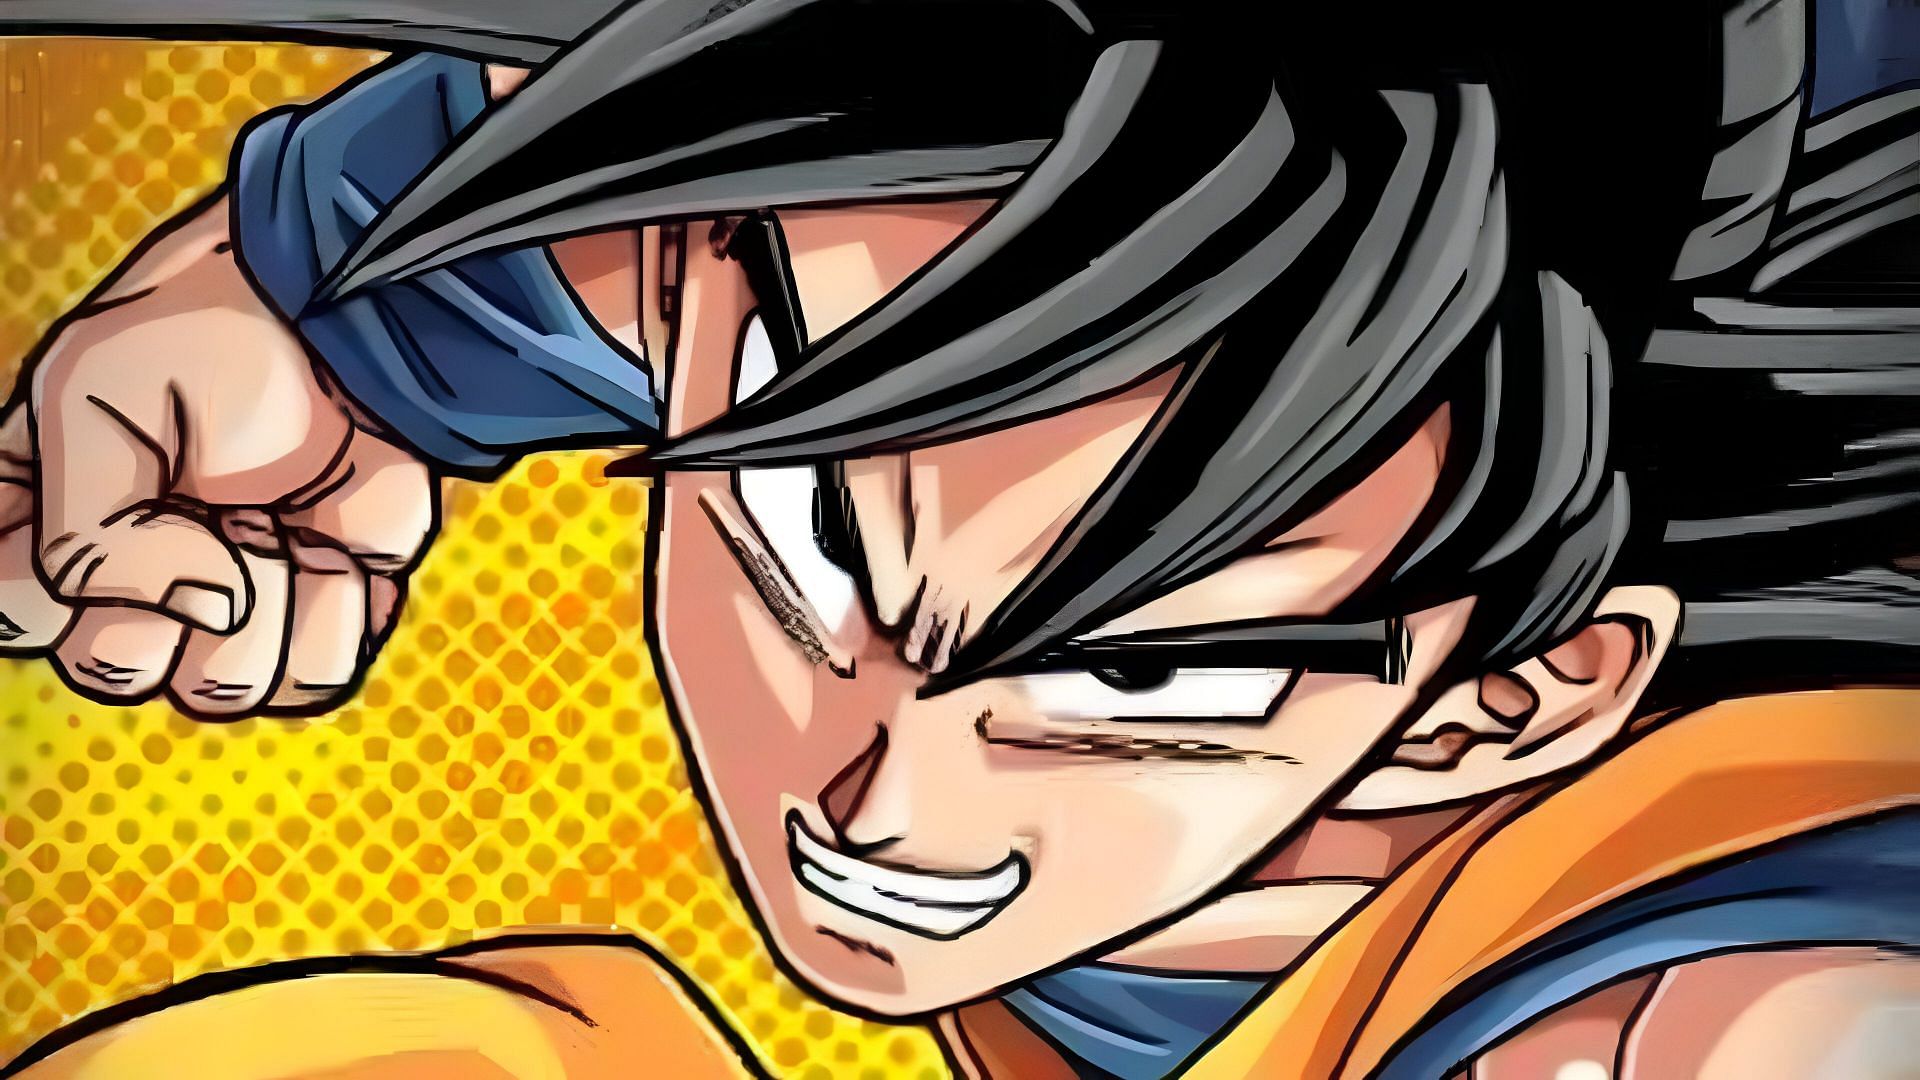 Dragon Ball Super manga to go on a hiatus after chapter 103